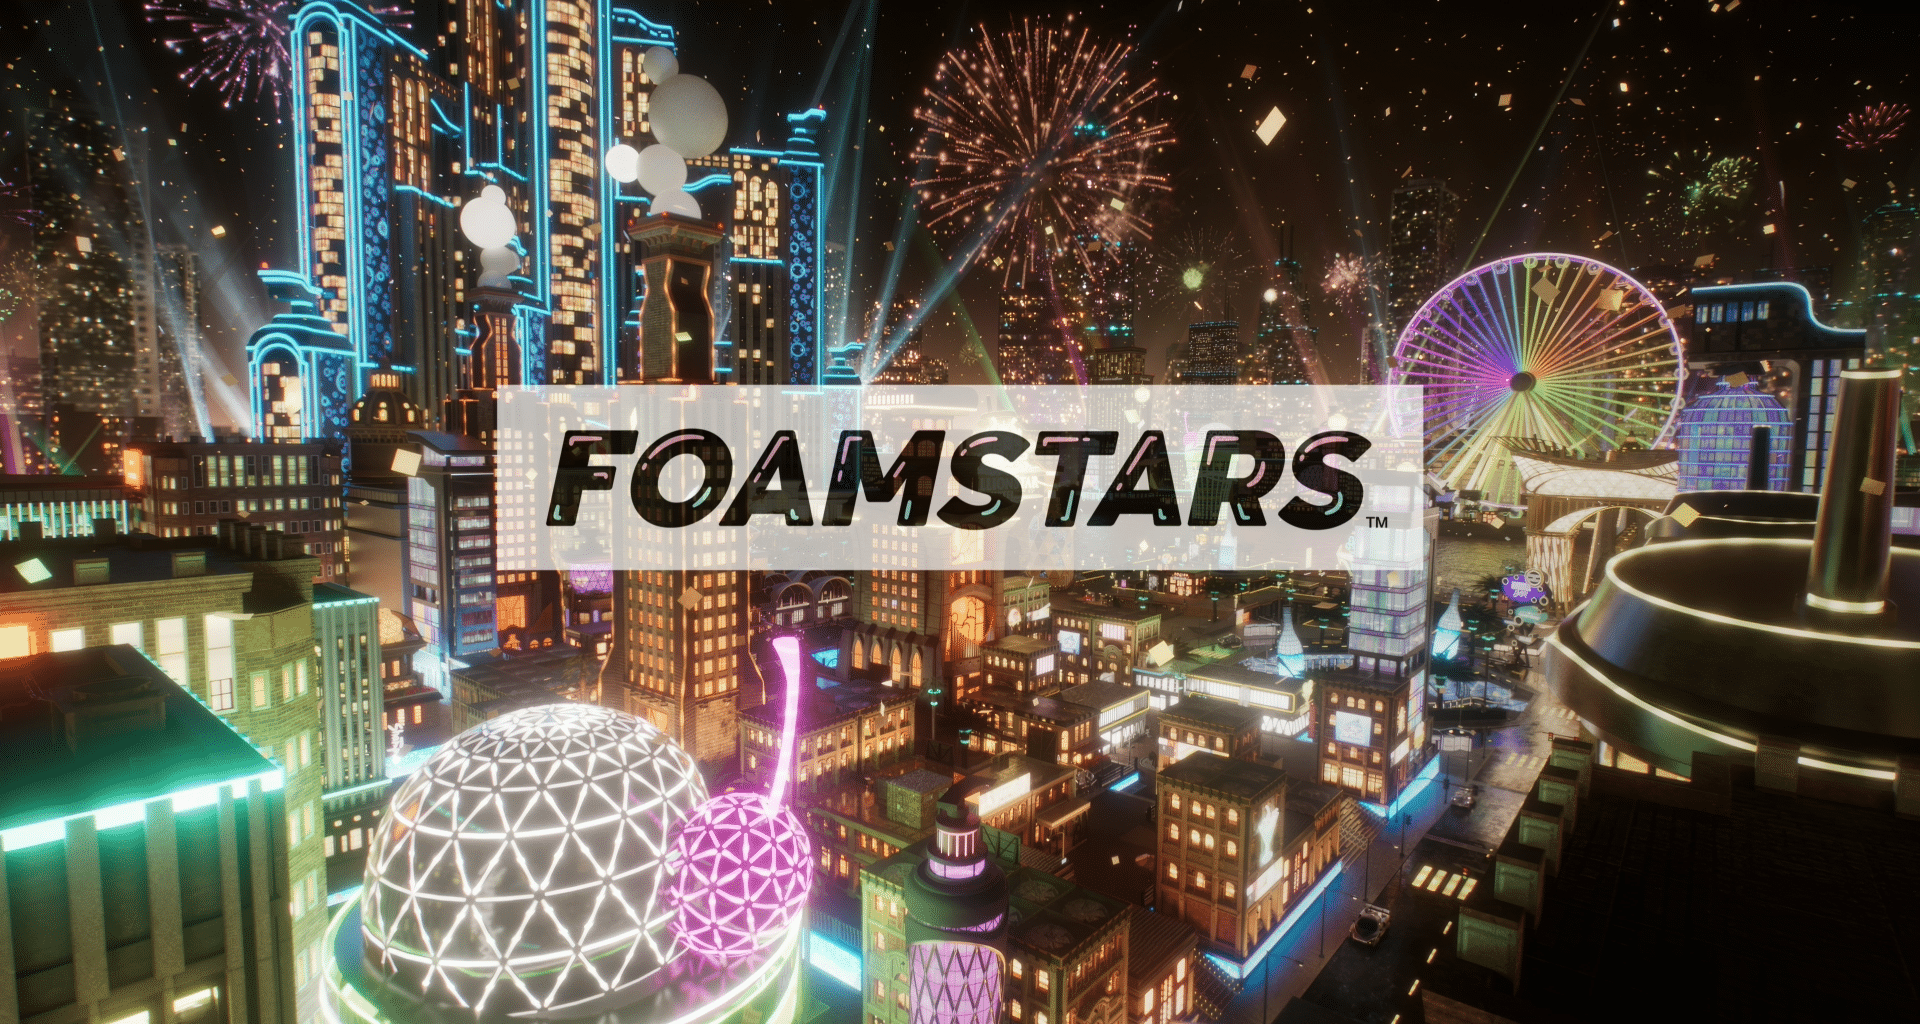 Foamstars Review - Fun, but Forgettable 345643 345